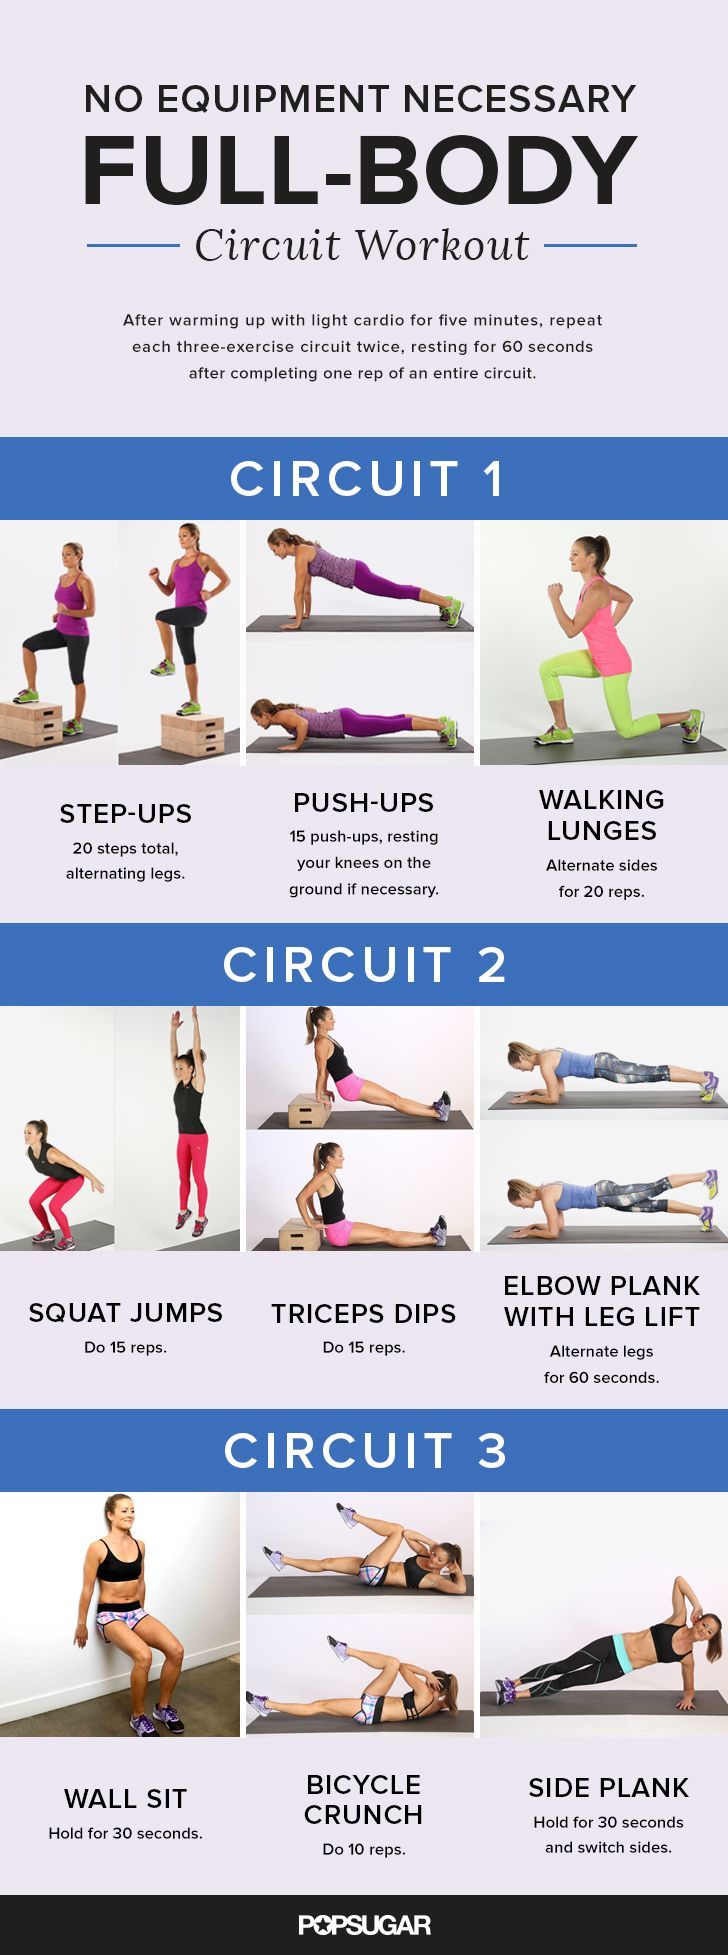 No Gym, No Problem! This Circuit Workout Uses Just Your Body